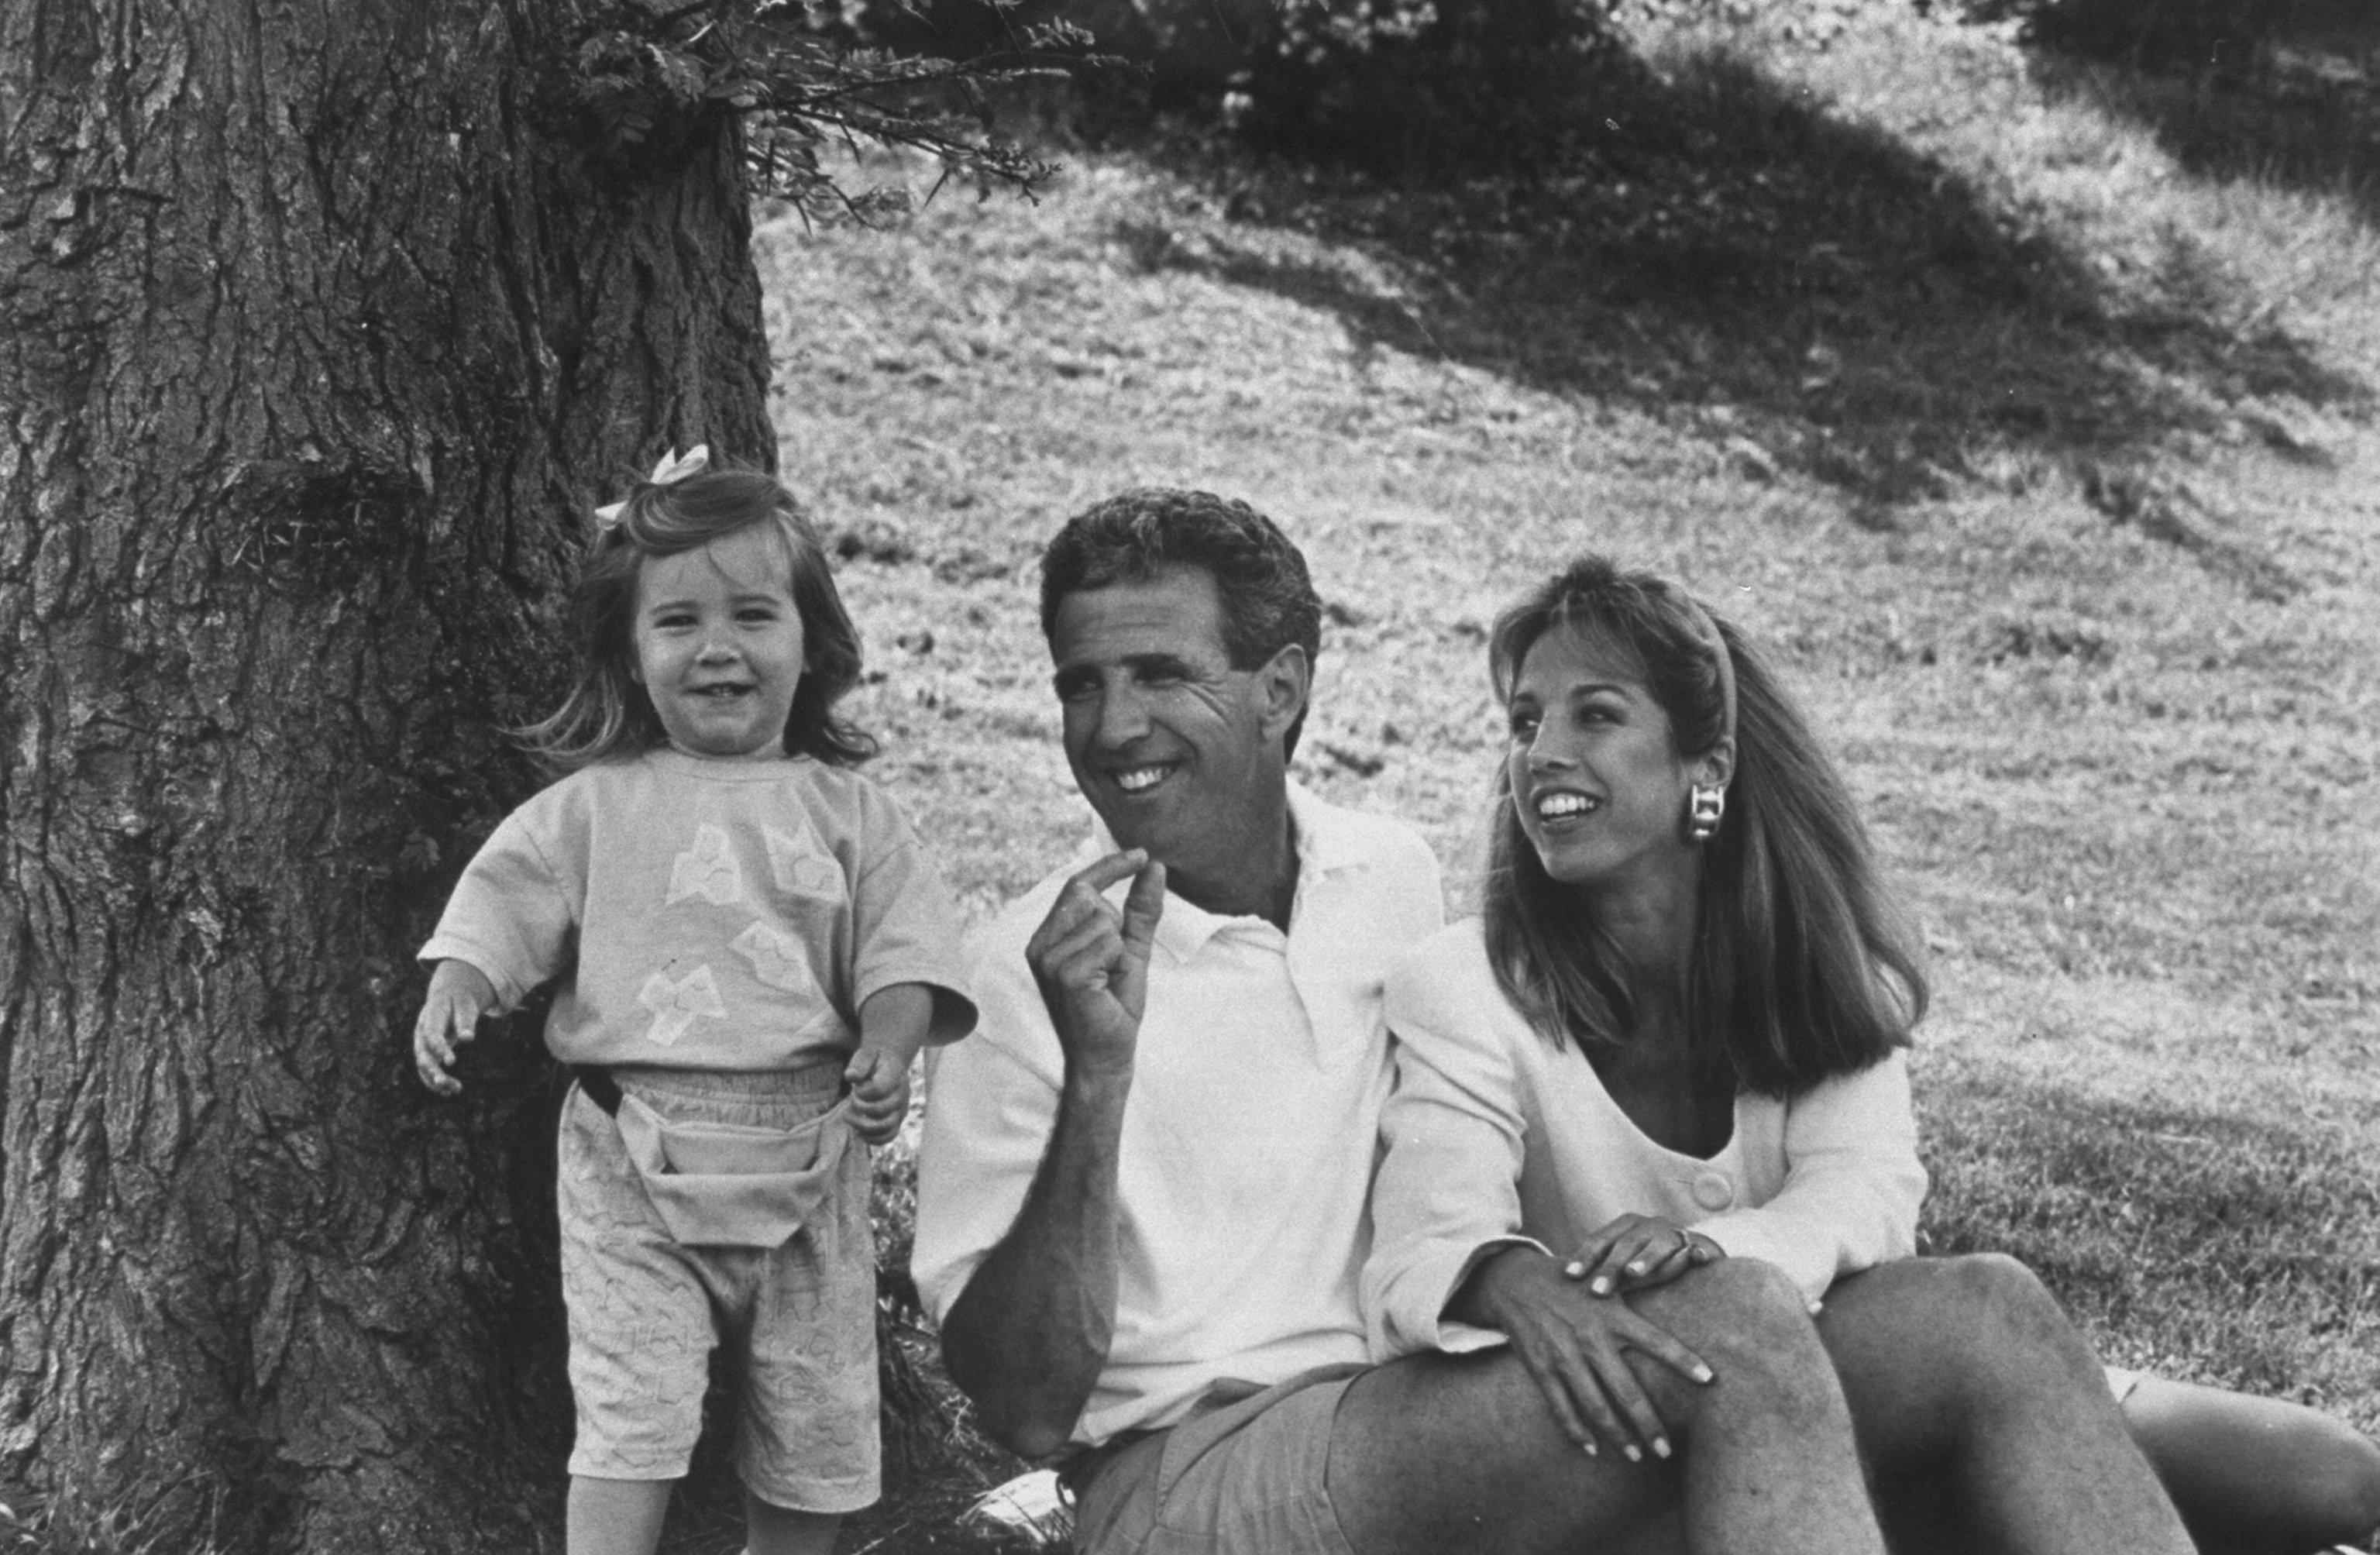 Denise Austin and Jeff Austin are pictured with their 21-month-old daughter, Kelly, sitting under a tree in a park near their home, June 3, 1992 |  Source: Source: Getty Images